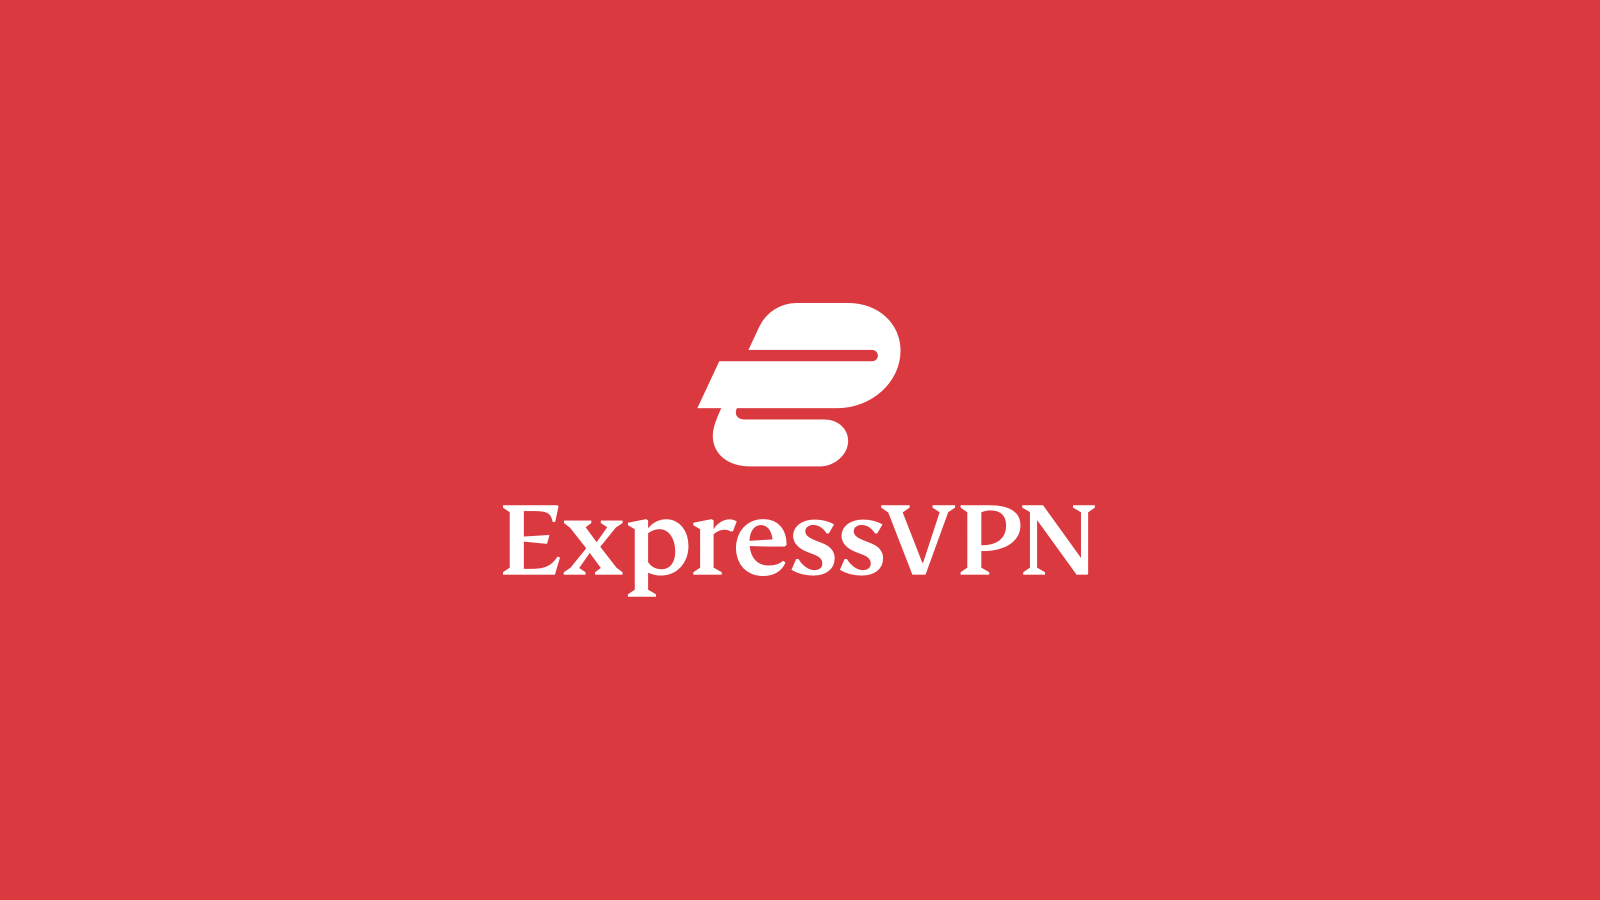 ExpressVPN Enters New Era With Design Refresh and a New VPN Protocol